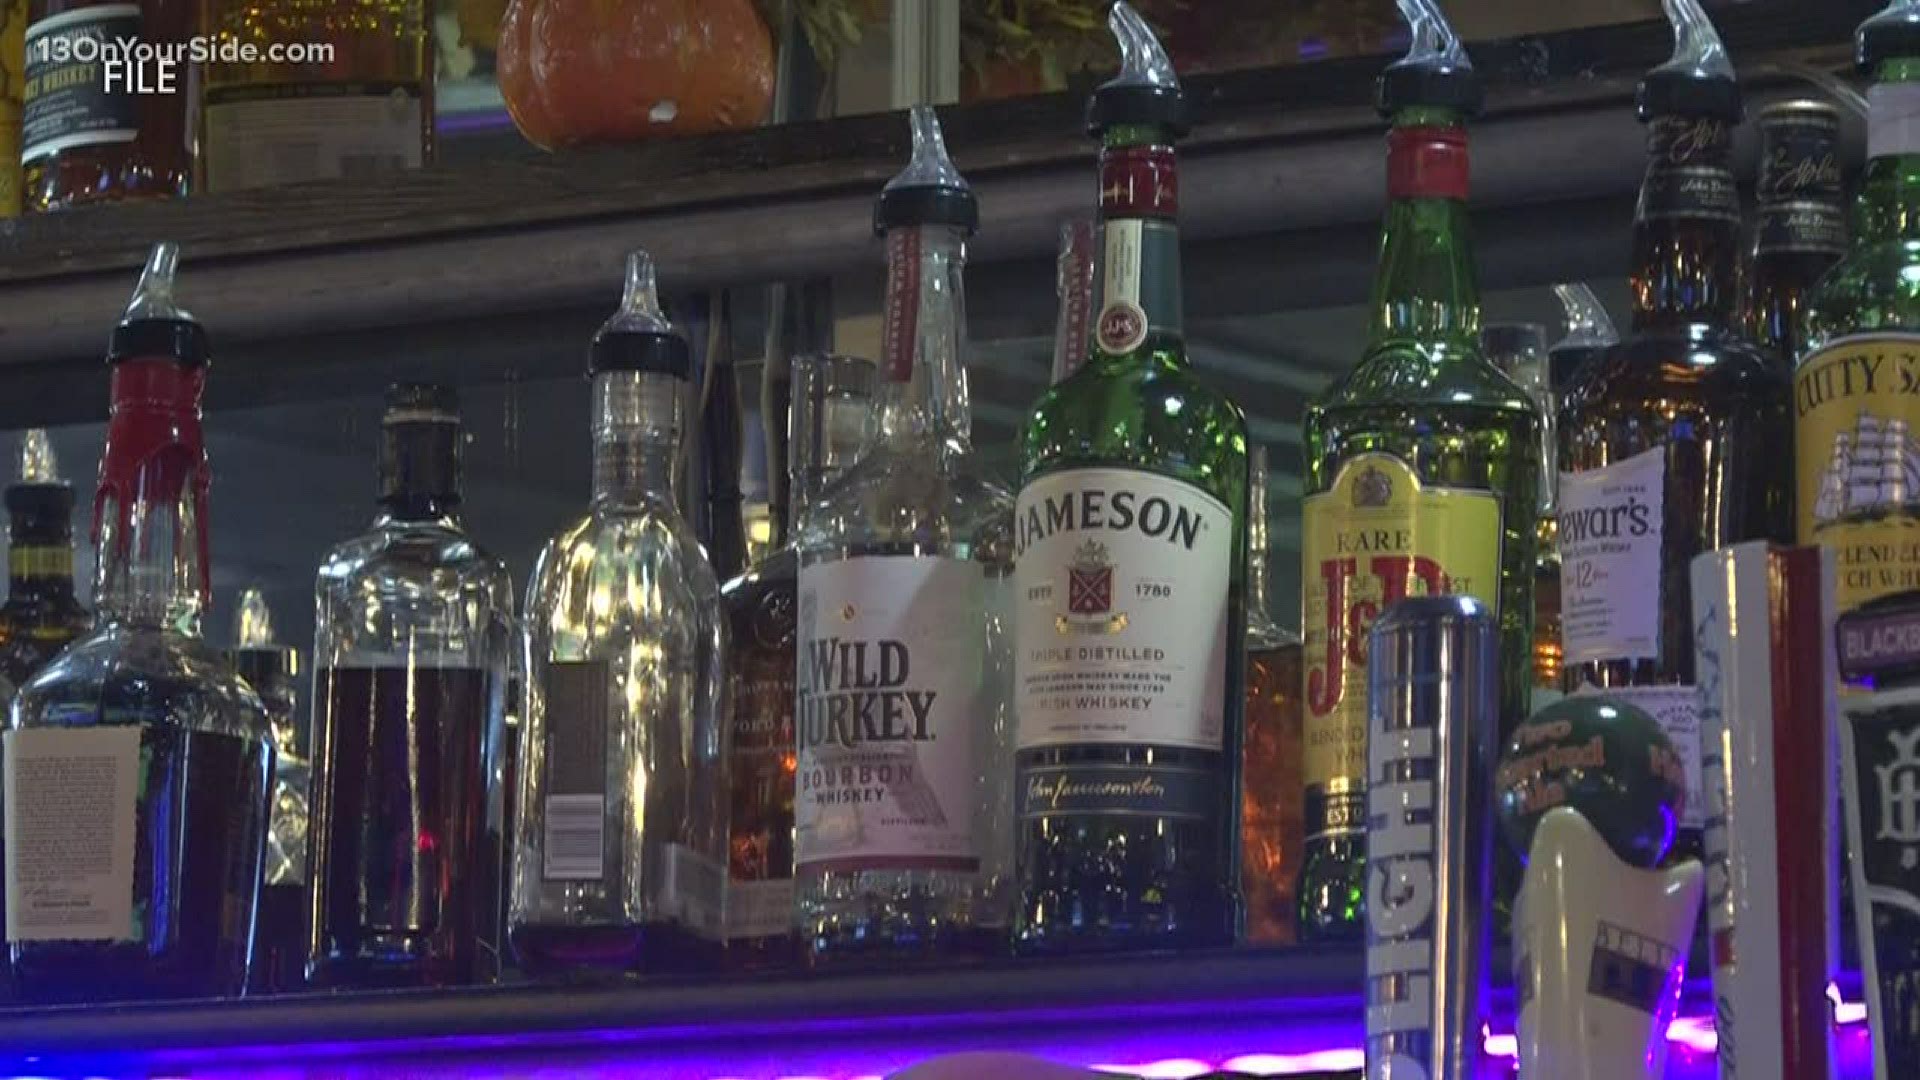 Liquor Buy Backs are an option for restaurants and bars struggling to make ends meet during the shutdown.